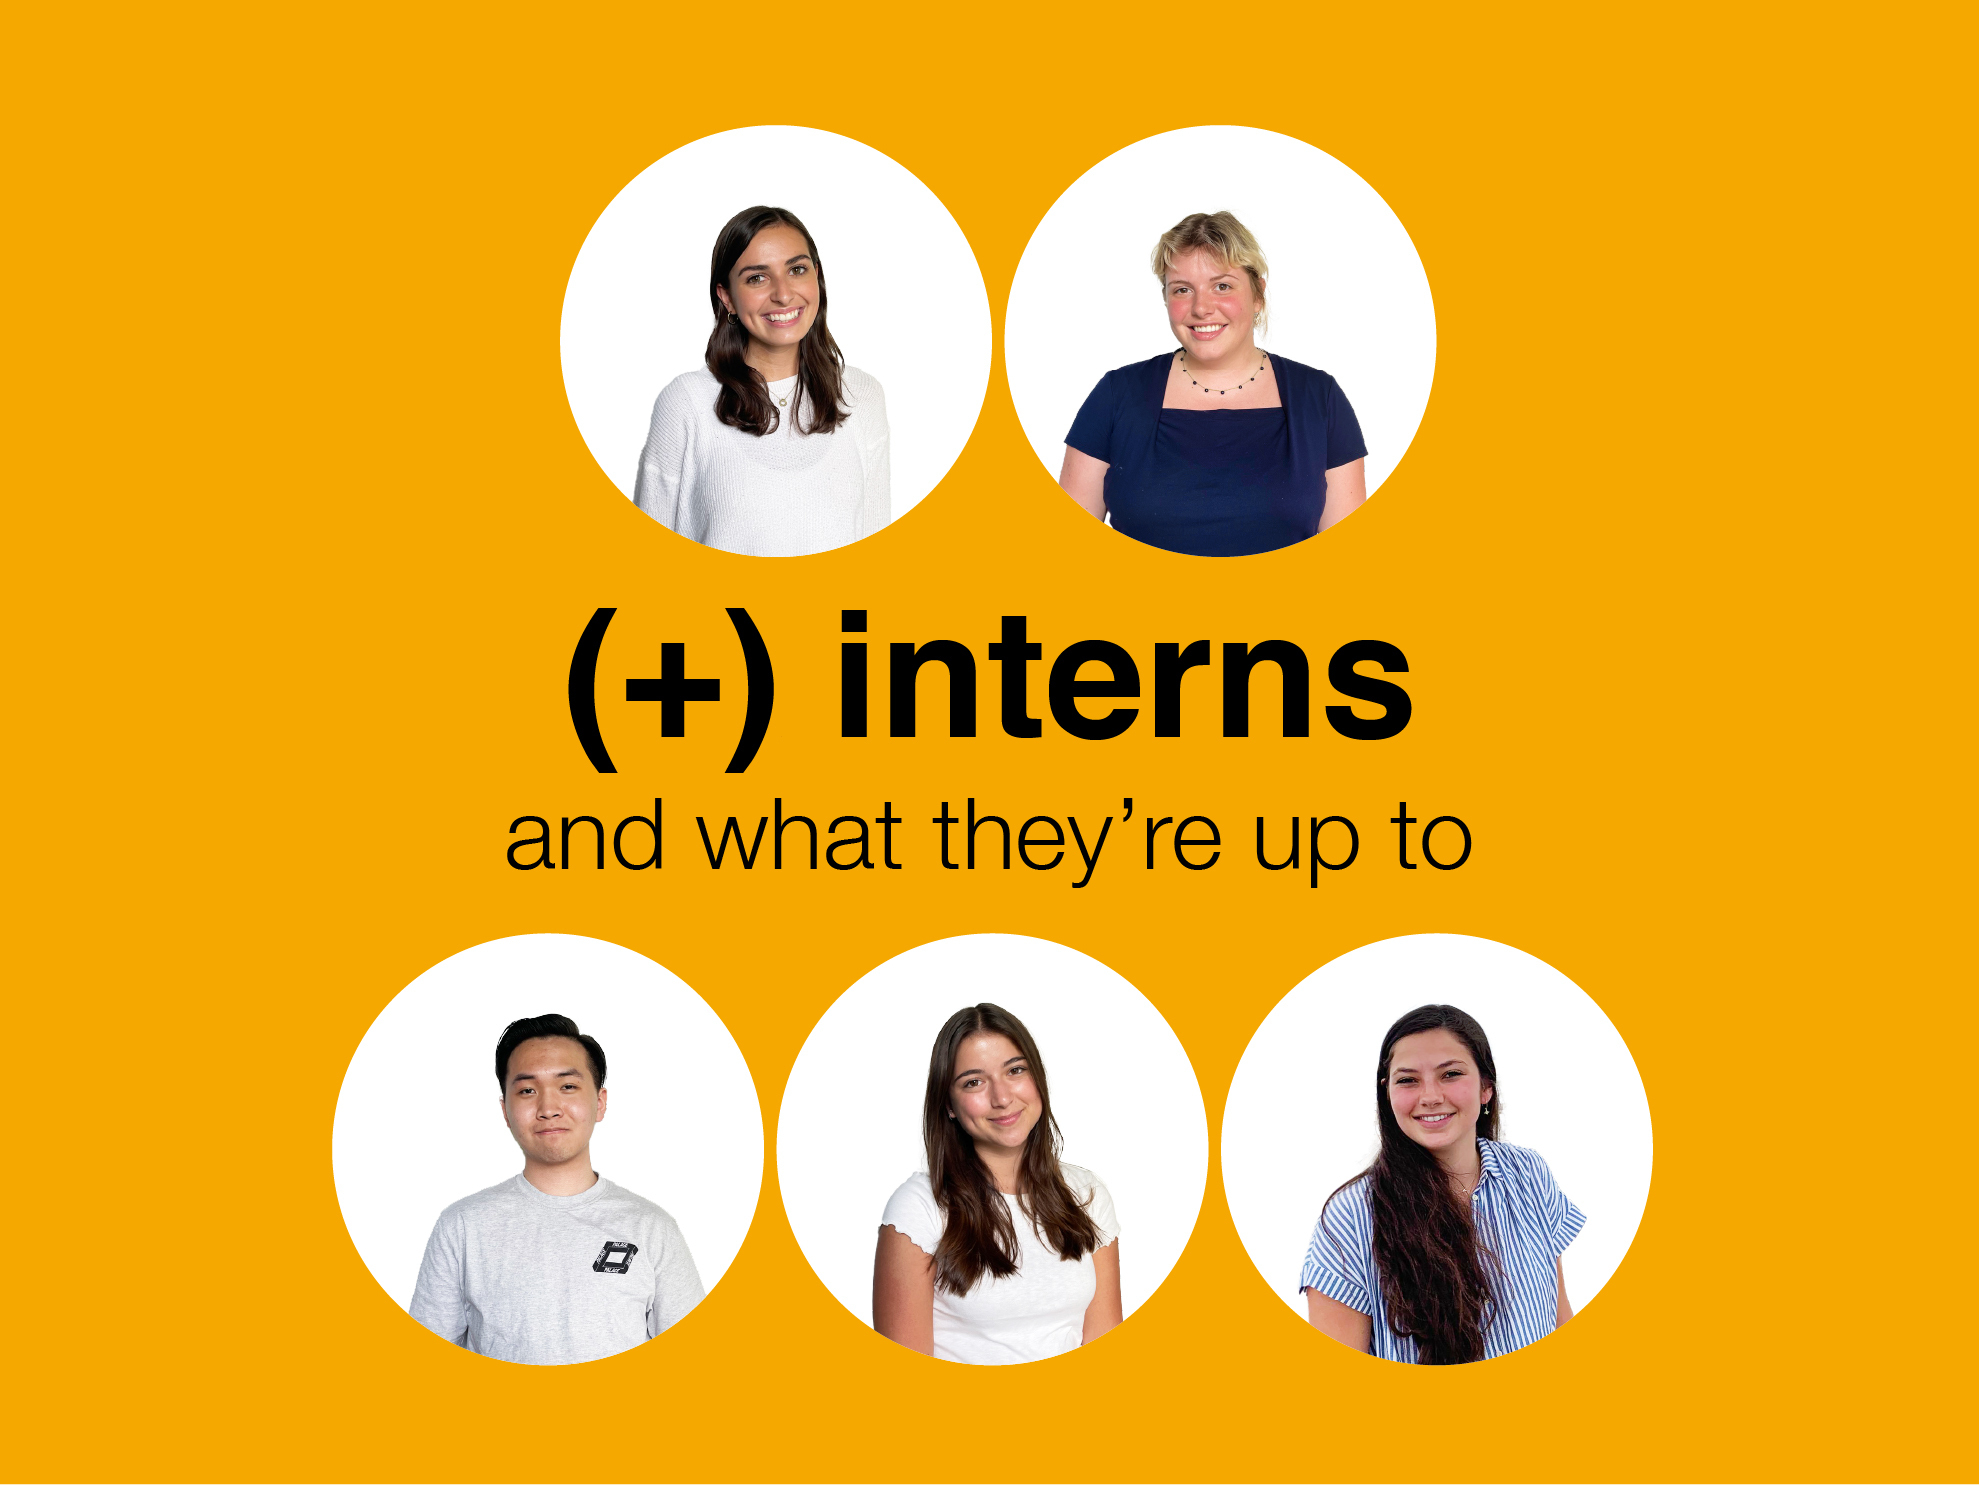 (+) interns and what they're up to